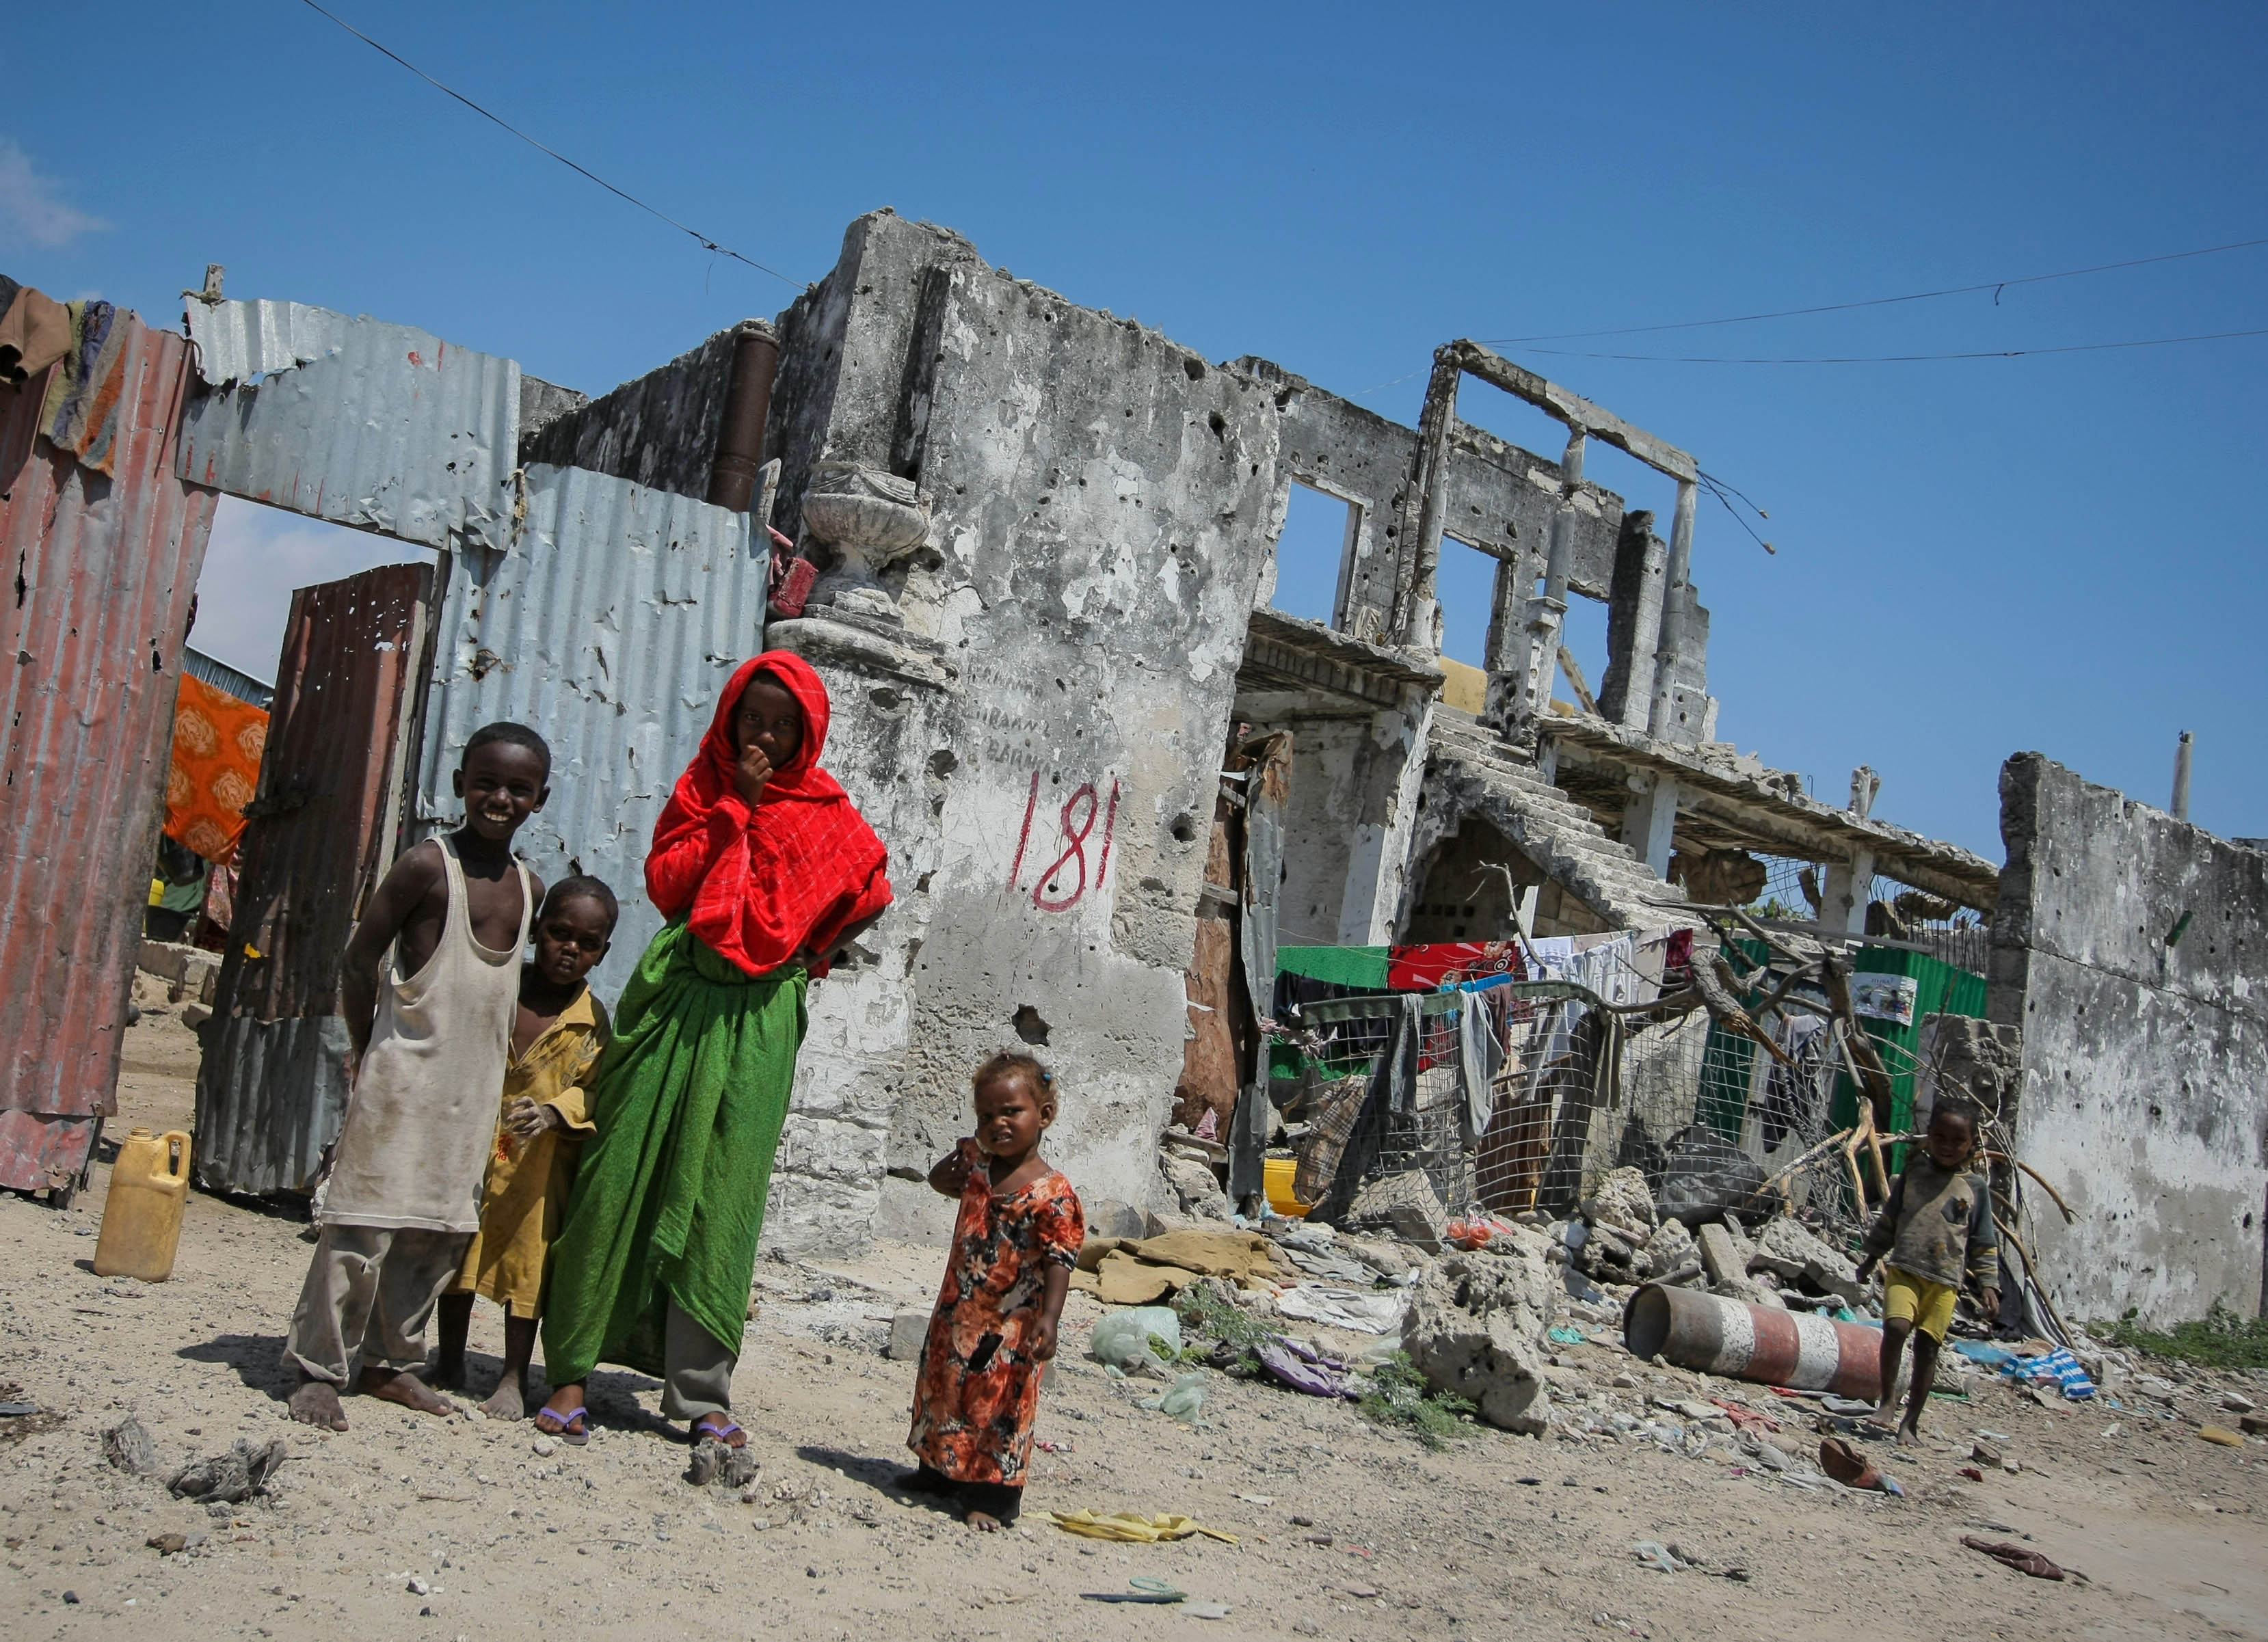 SOMALIA, Mogadishu: In a photo taken 09 November and released by the African Union-United Nations Information Support Team 10 November, Somali children are seen standing in front of their homestead in a derelict building in the Abdul-Aziz district of the Somali capital Mogadishu. The United Nations Security Council on November 7 renewed the mandate of the African Union Mission in Somalia (AMISOM) peacekeeping force for a further four months to continue providing support to the Government of Somalia in its efforts to bring peace and stability to the Horn of African country. AU-UN IST PHOTO / STUART PRICE.